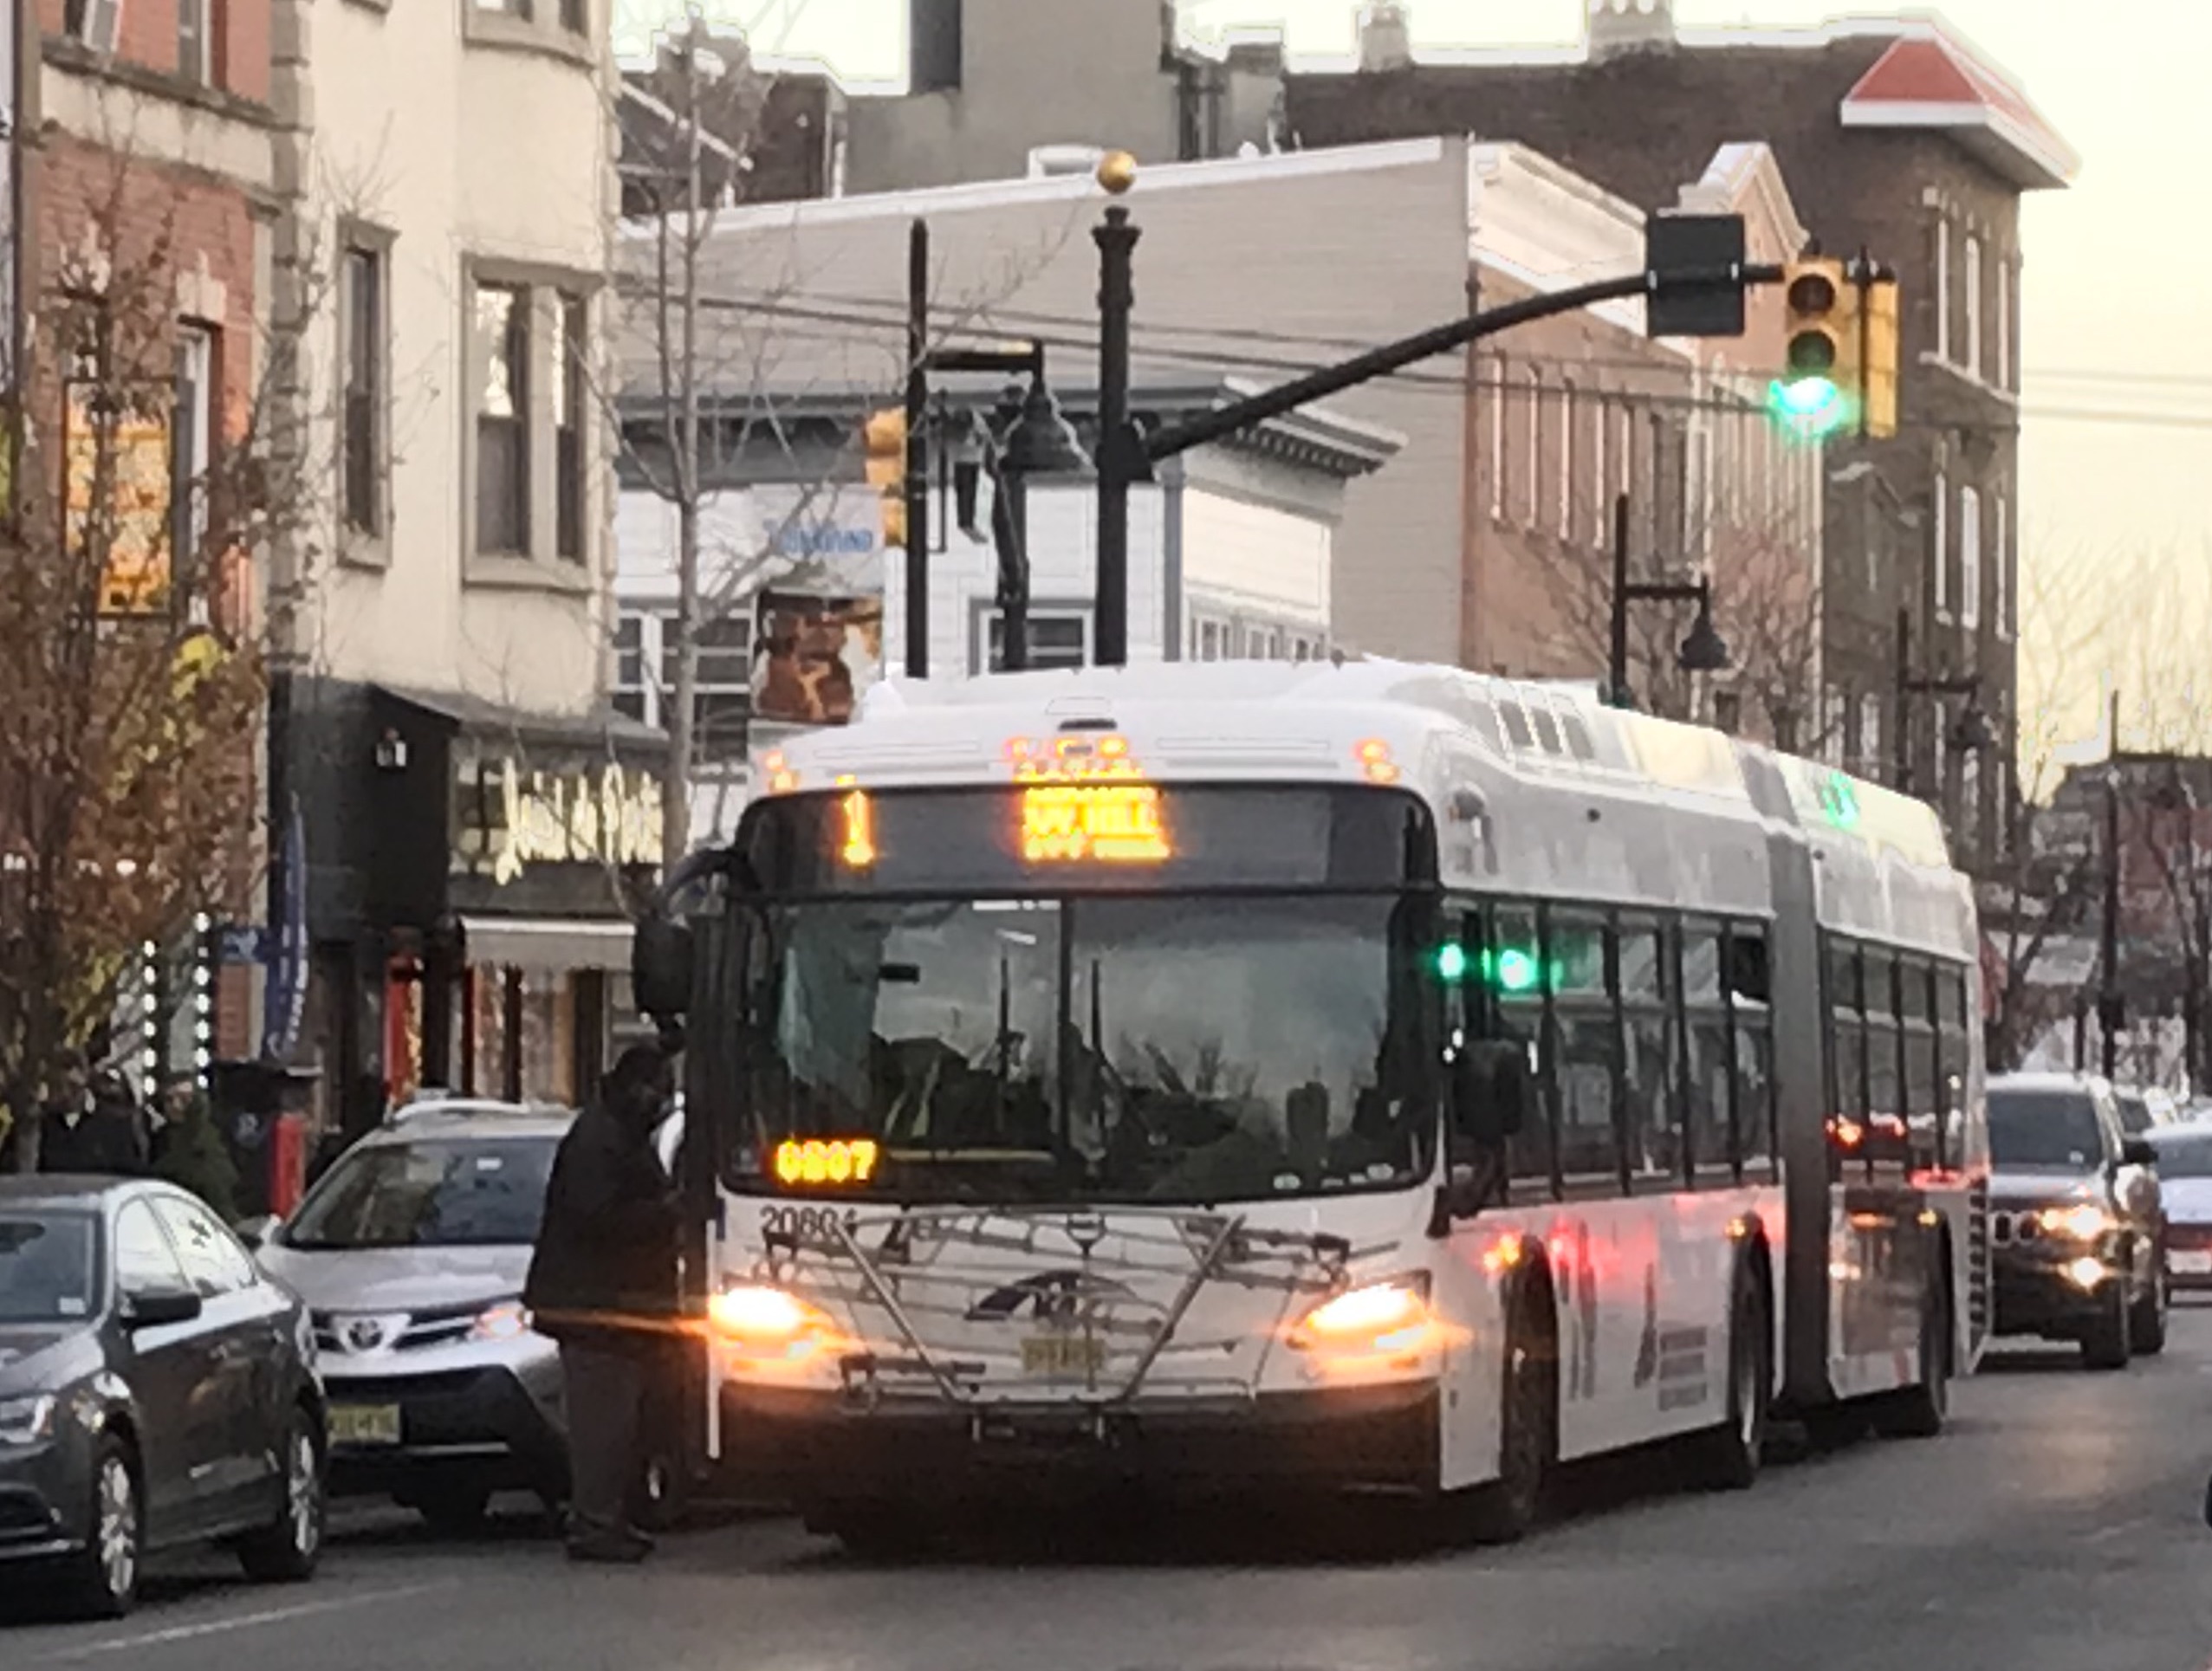 Advocates invite Gov. Murphy to ride a NJ Transit bus and experience what riders face